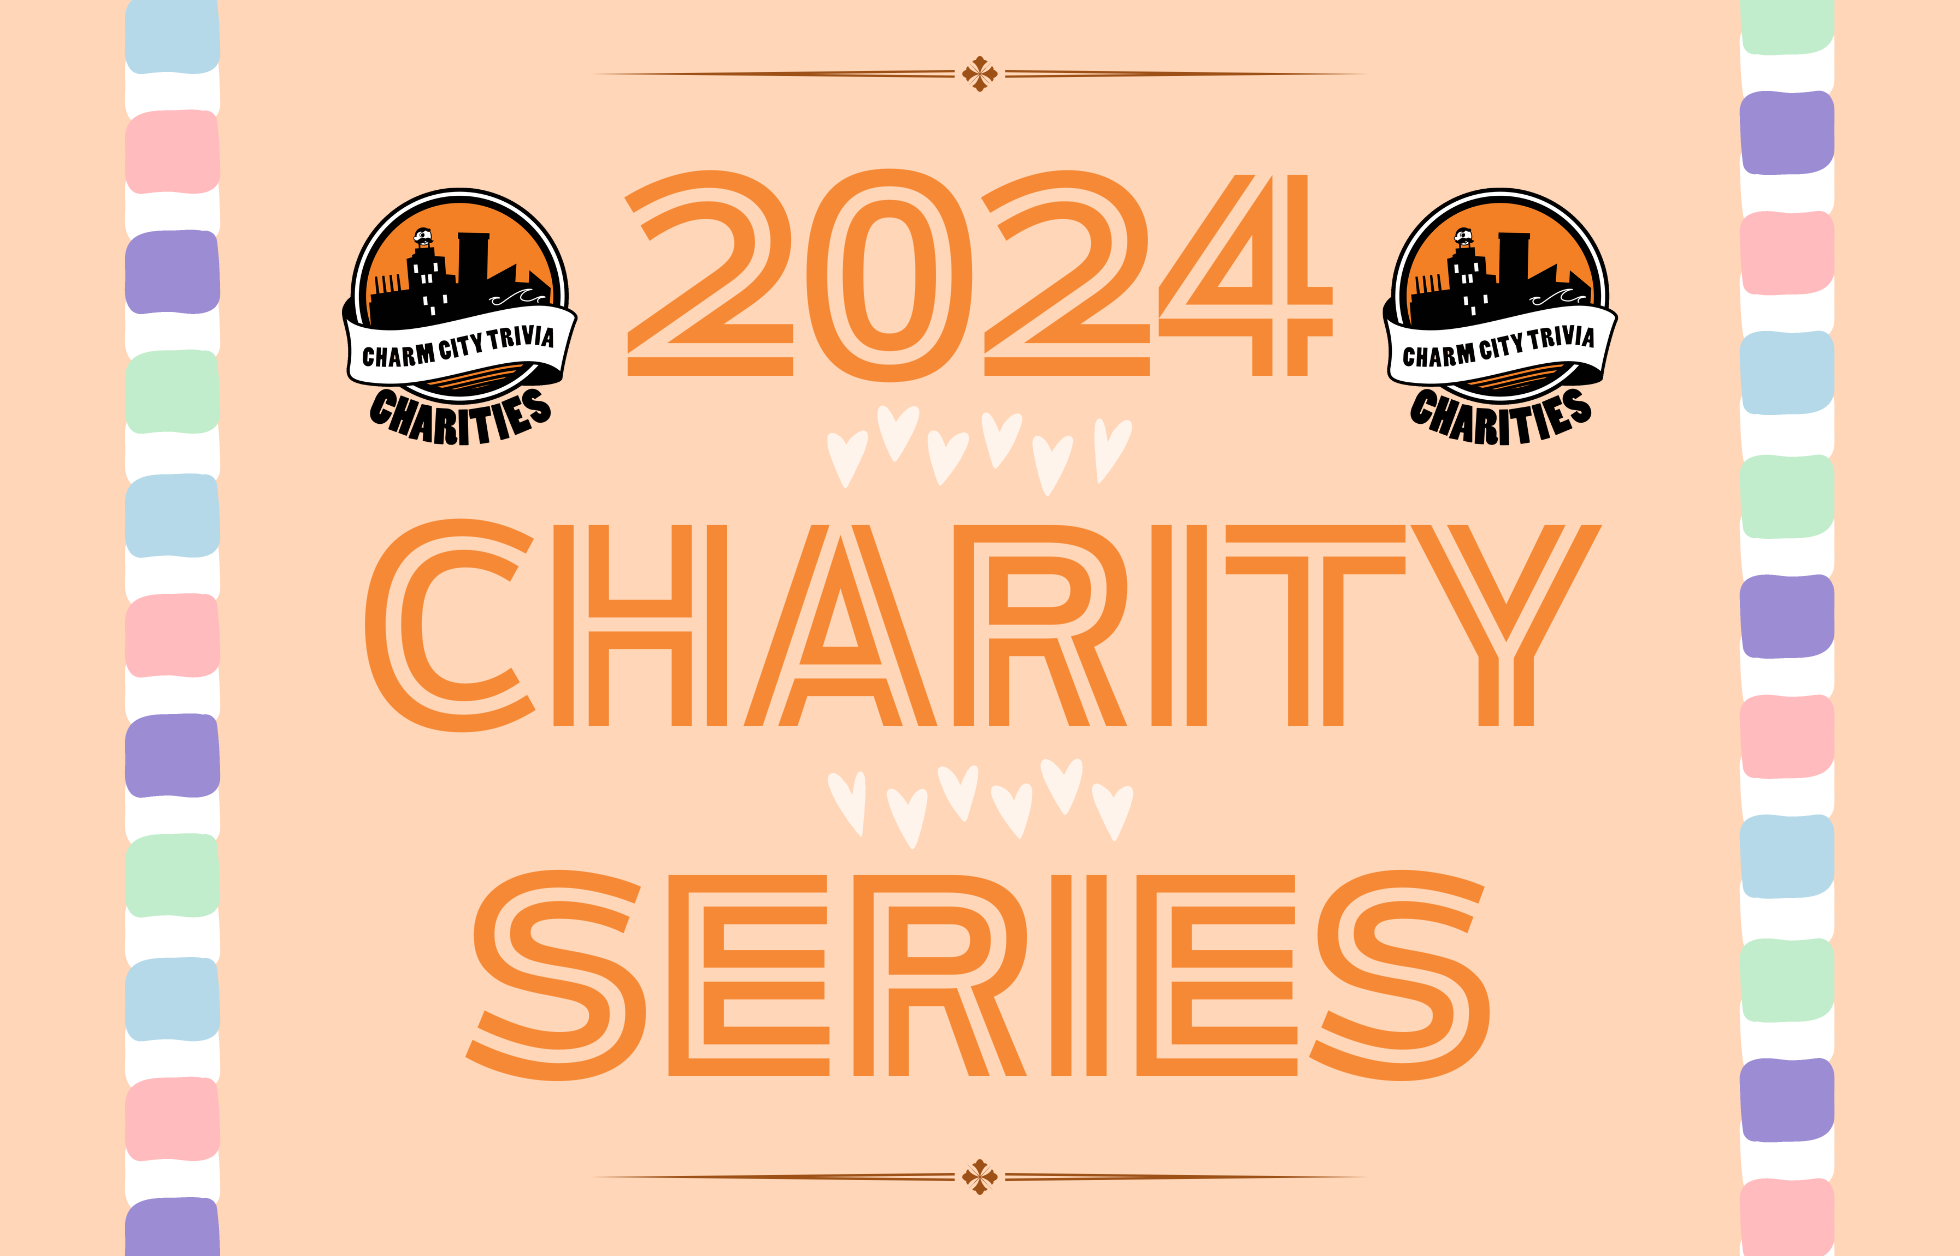 a light orange background with a colorful border, two Charm City Trivia Charities logos, dark orange lines at the top & bottom, and orange text. The text reads: 2024 Charity Series